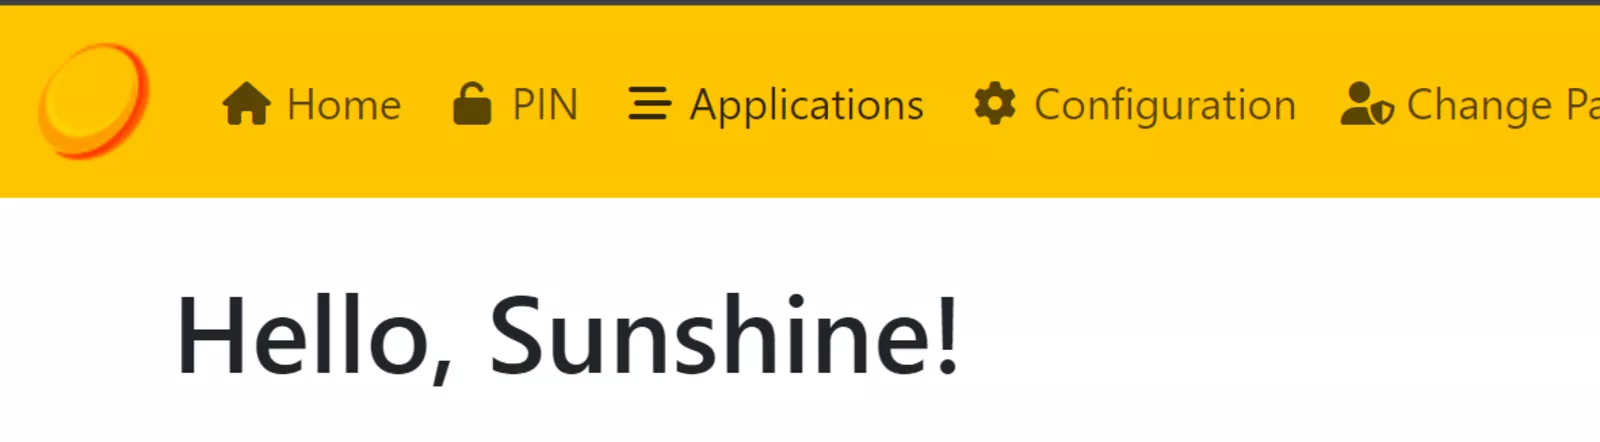 Screenshot of the Application section in Sunshine client 